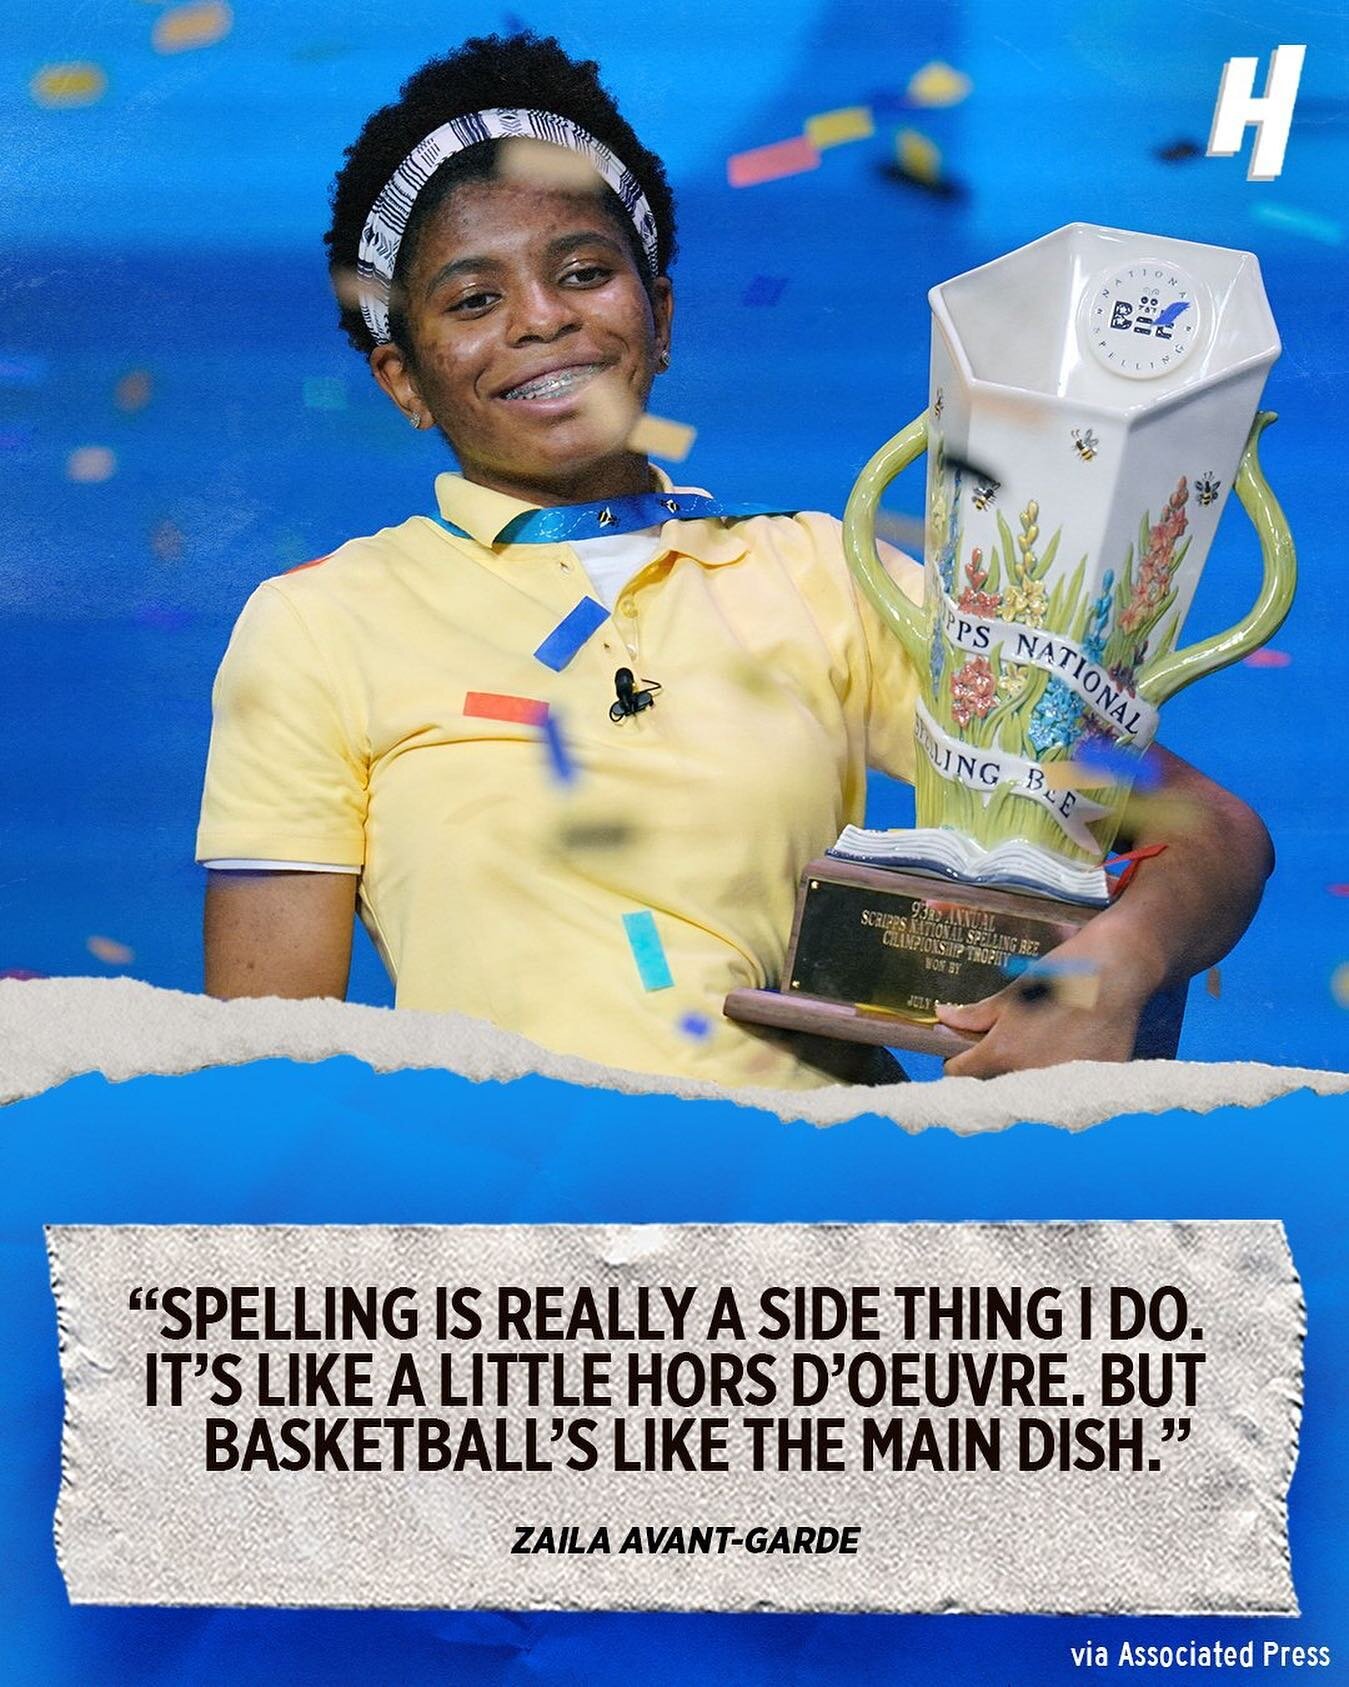 Congratulations Zaila! She won the National Spelling Bee, has three Guinness records for basketball and a bright future. You've made Louisiana proud!